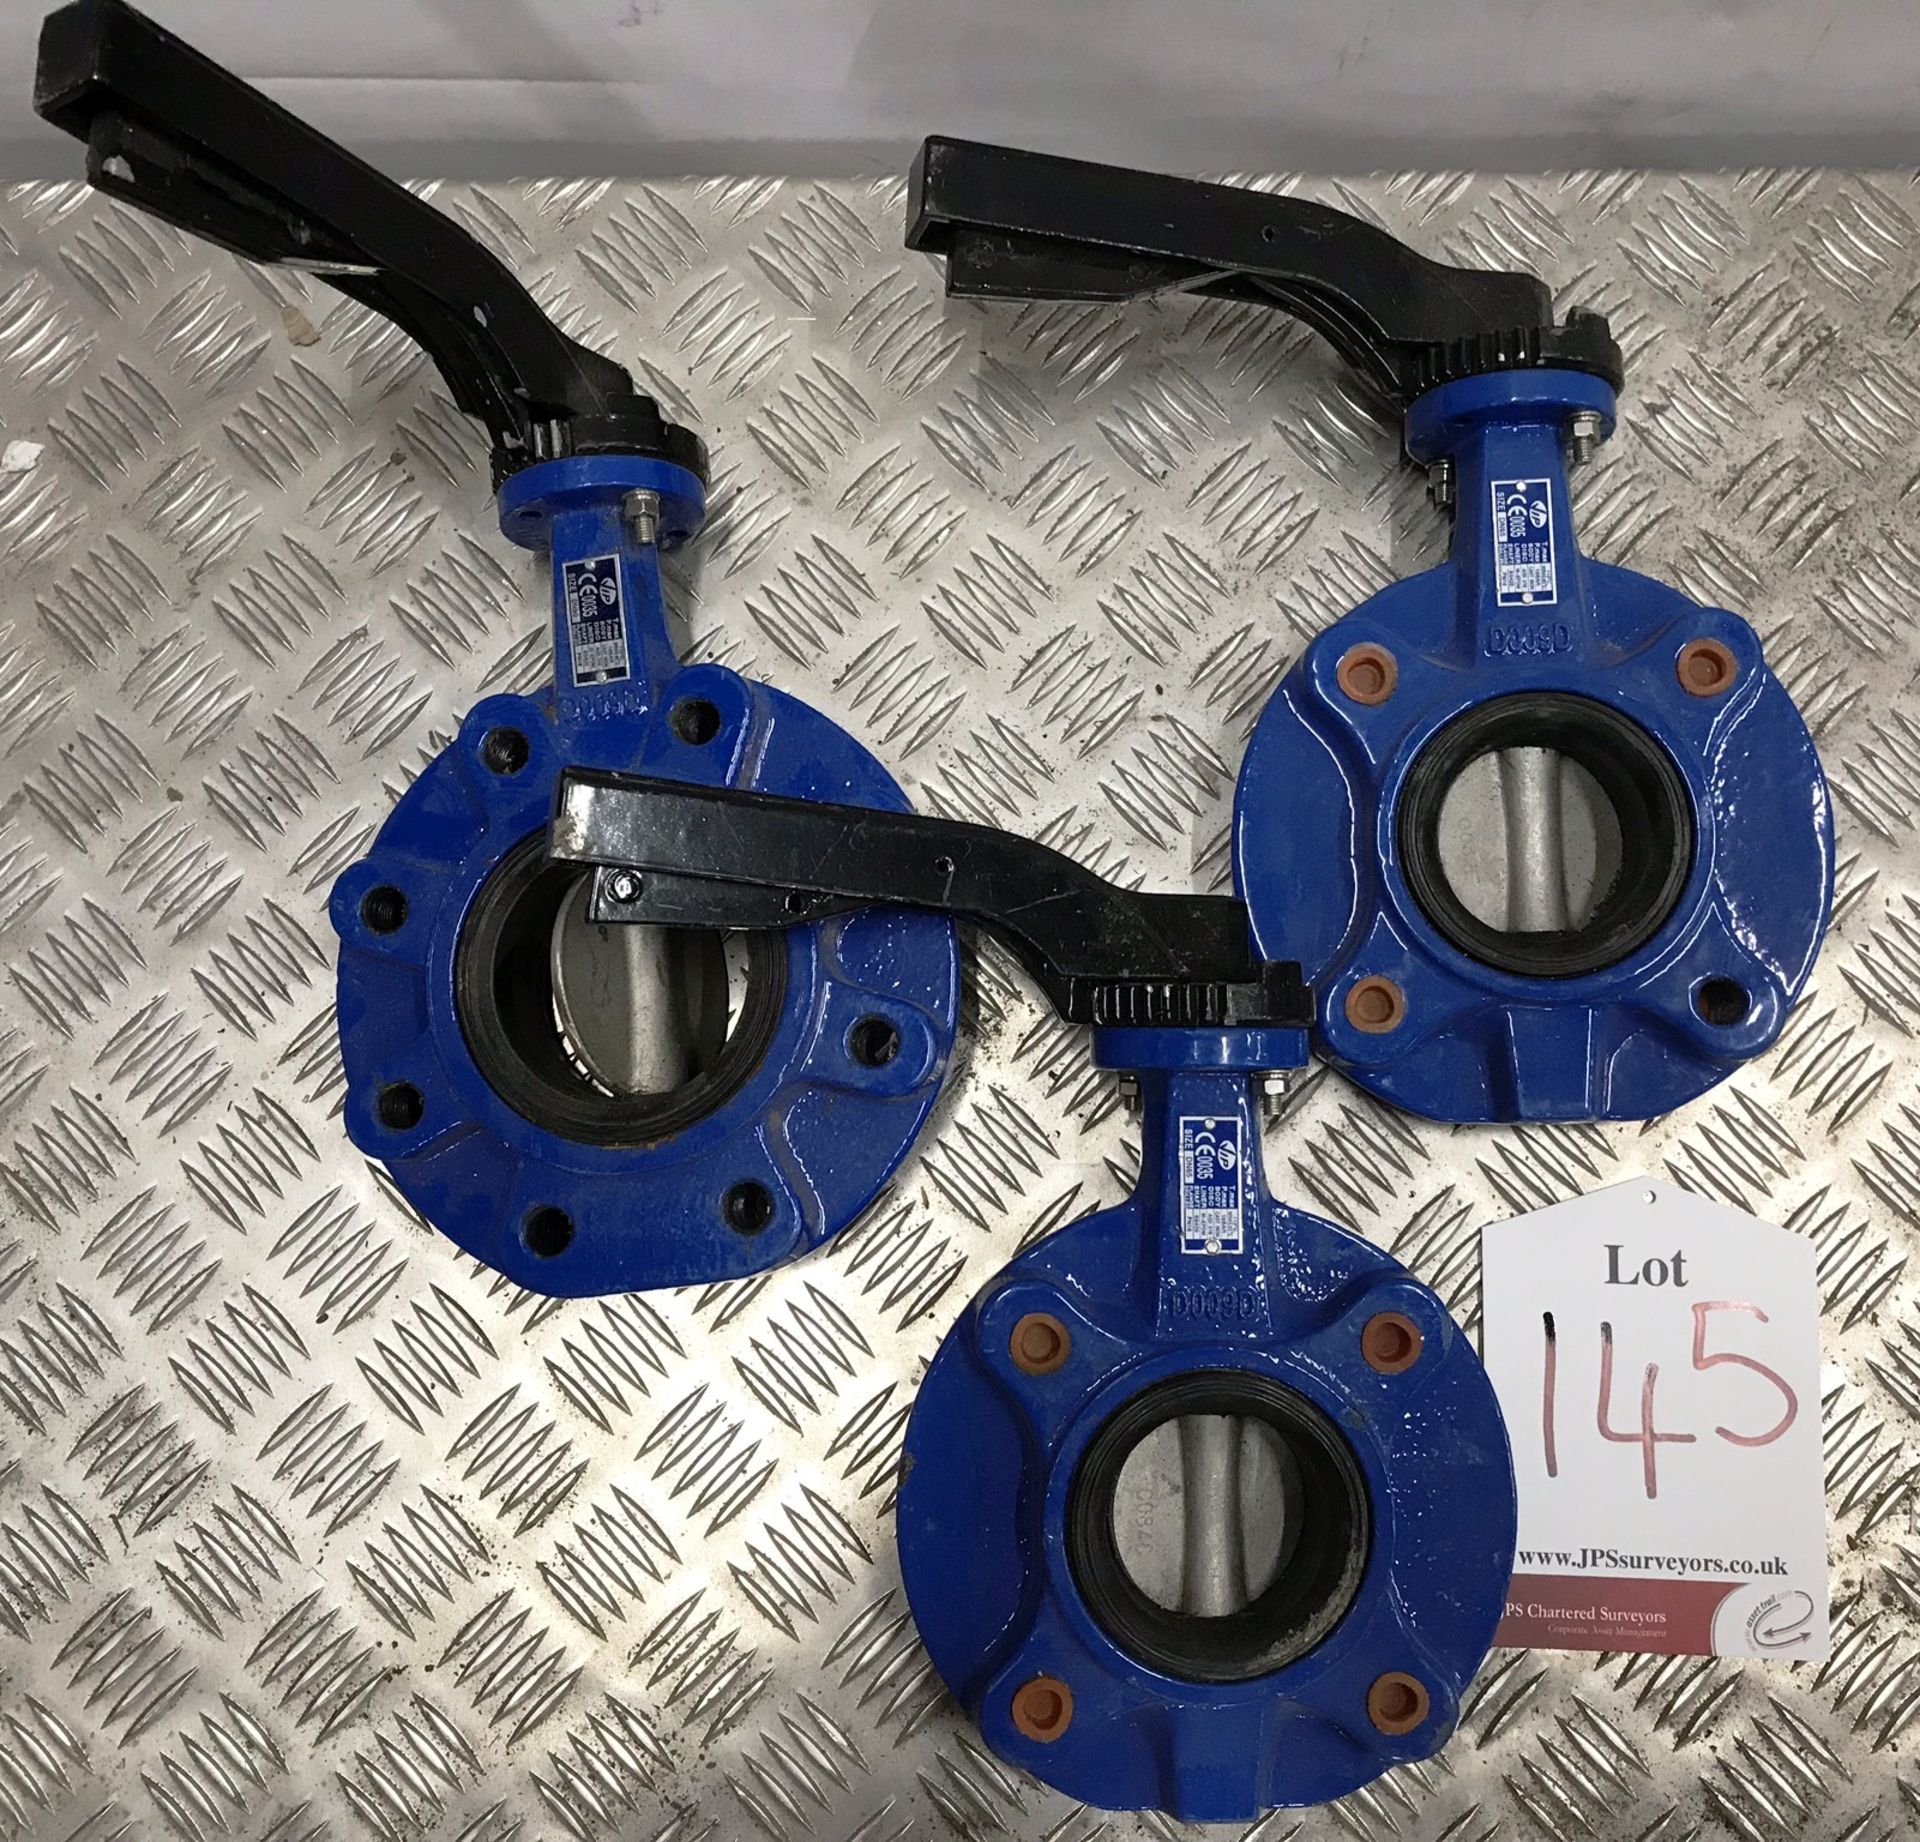 3 x Vip lugged butterfly valves - 2 sizes